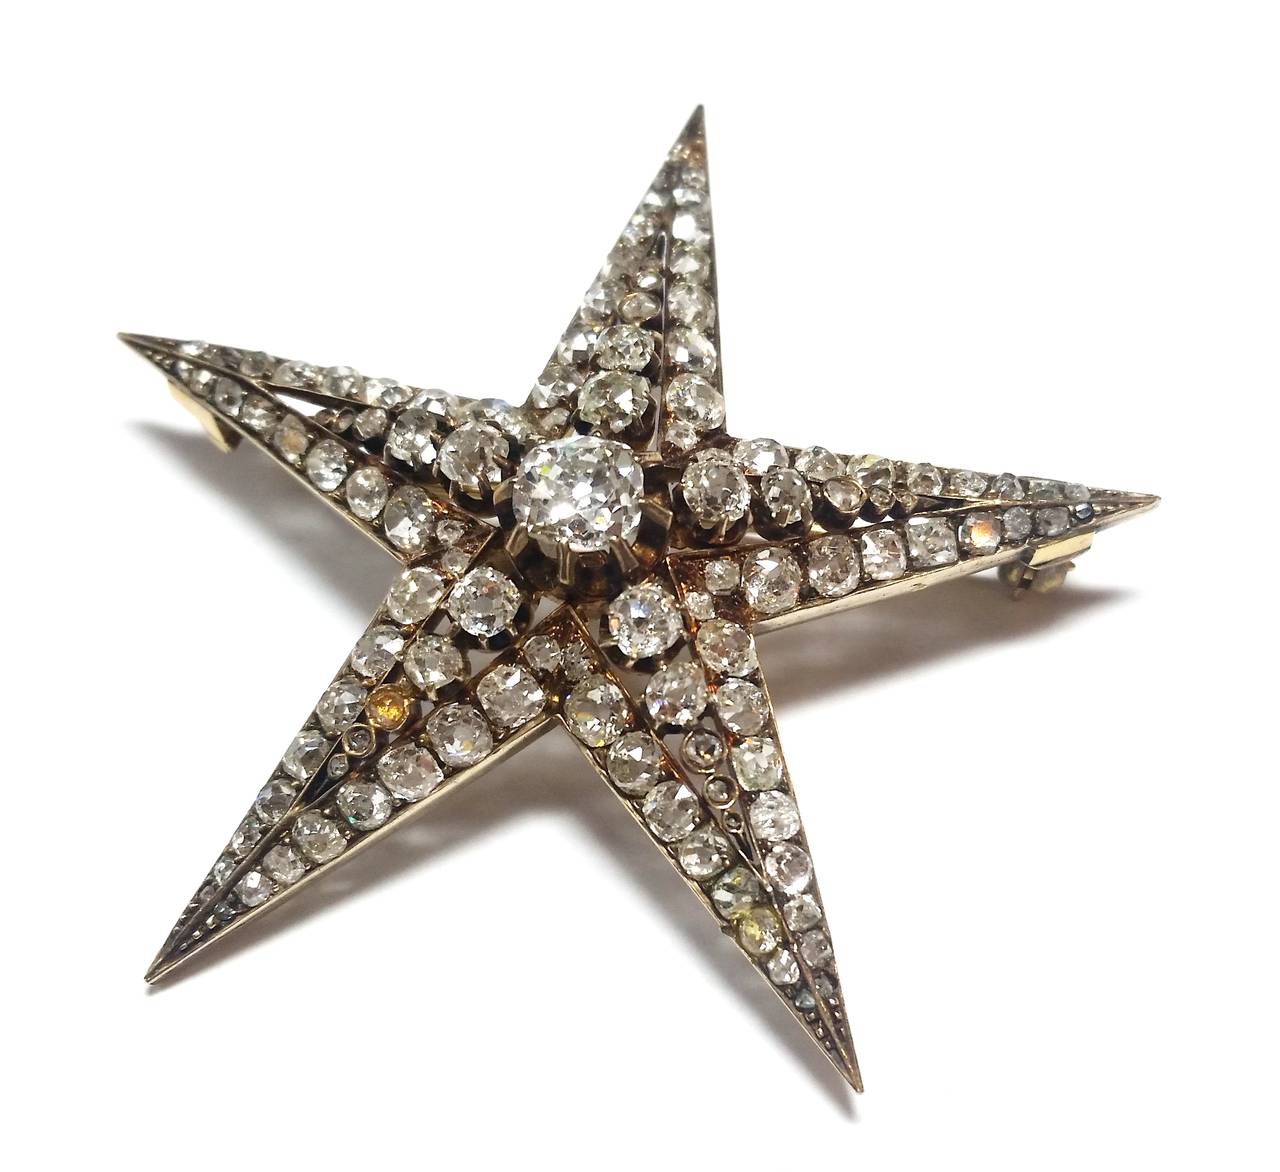 Yellow gold and diamond star brooch. 
French gold marks
Central diamond is an antique cushion cut 0.75ct approx.
The rest of them are cushion and old european cuts weighting in total 5ct approx.